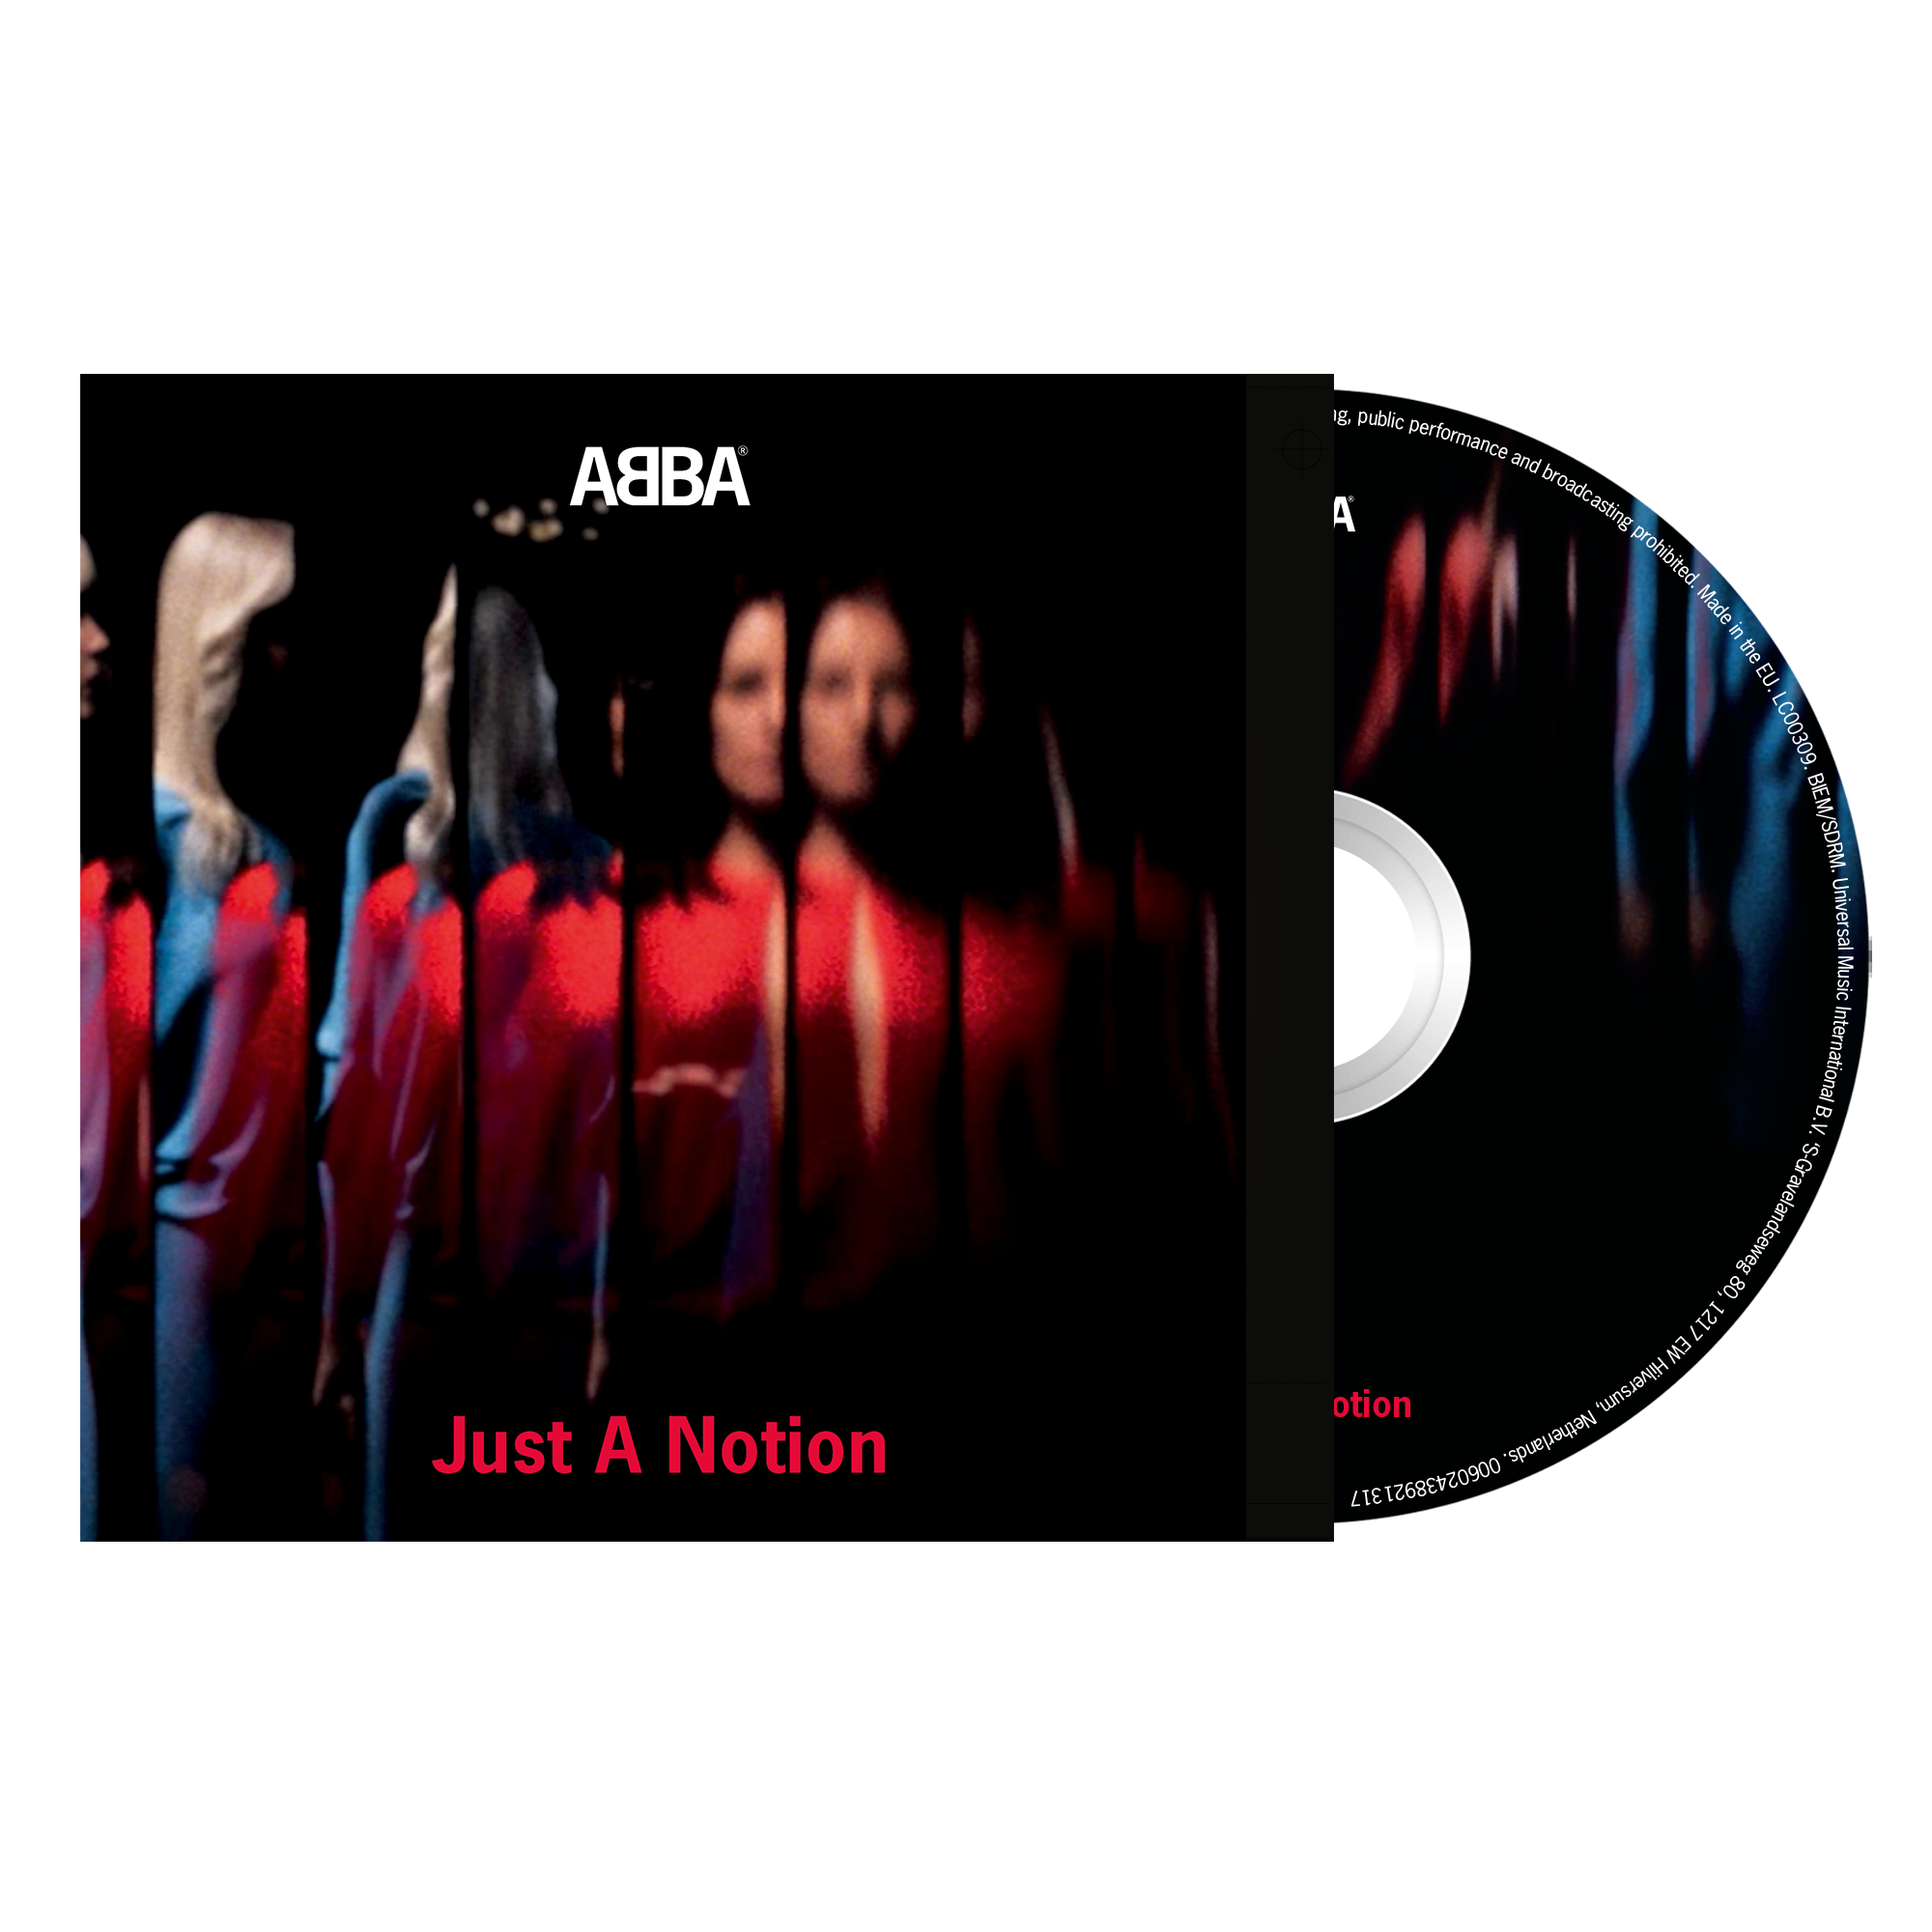 ABBA - Just A Notion: CD Single